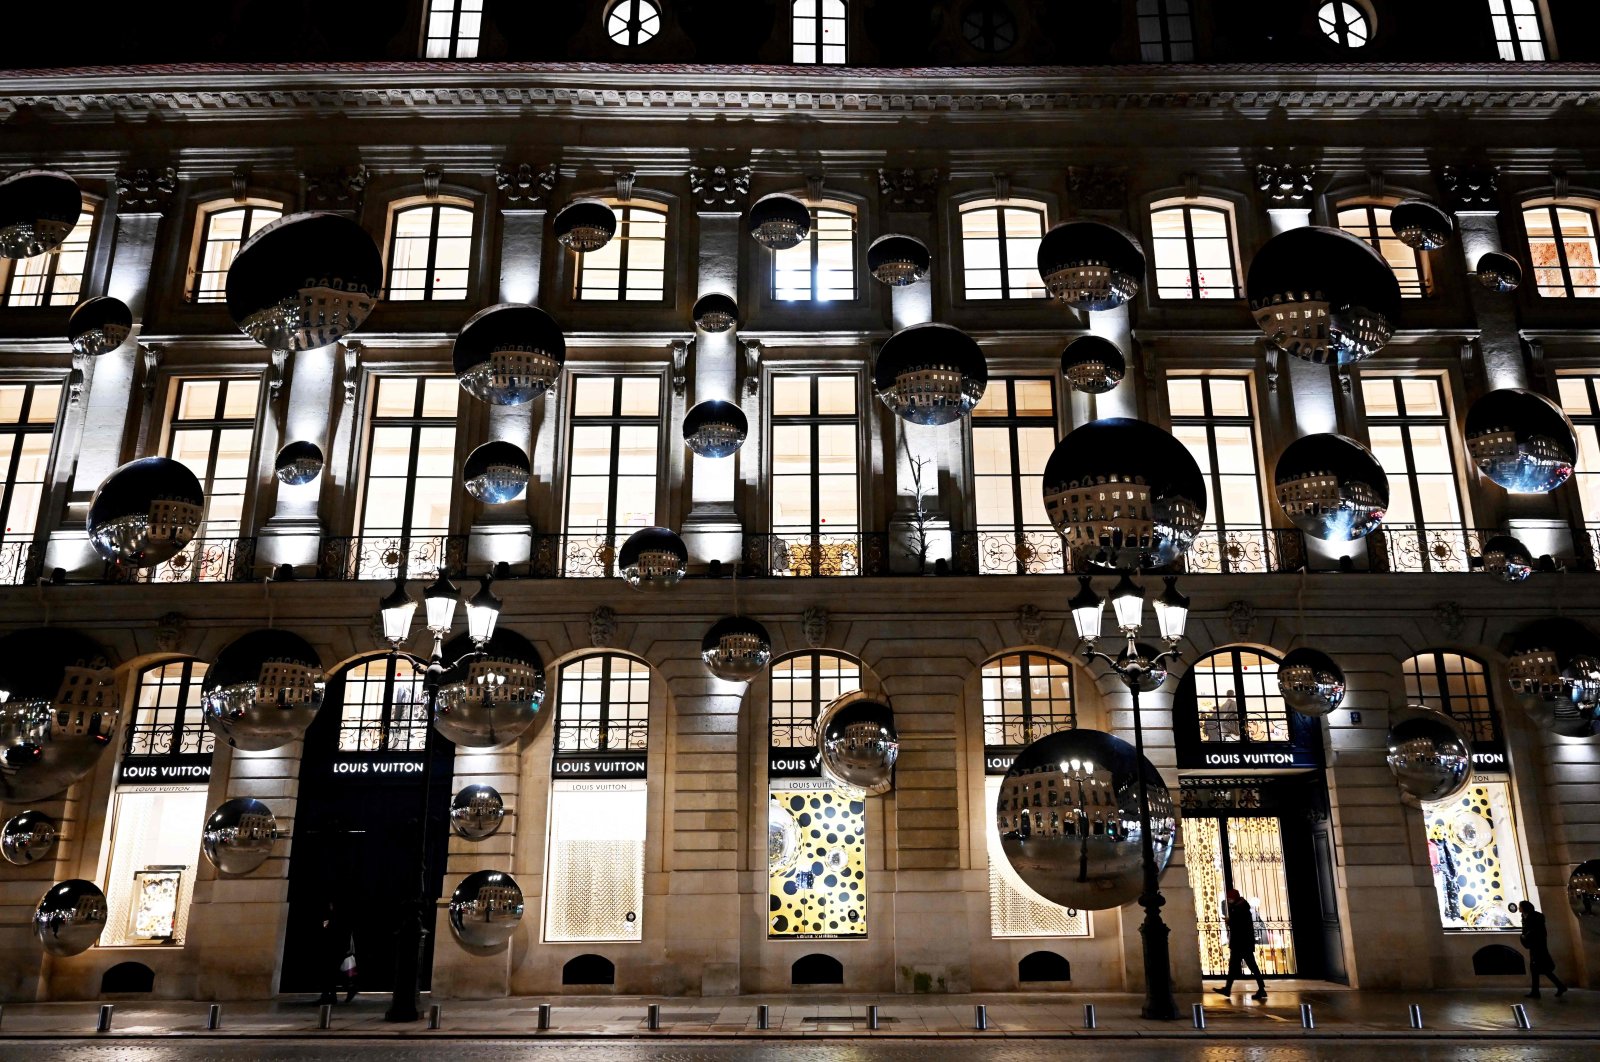 A pedestrian walks past a display of convex mirrors adorning the exterior of the Louis Vuitton flagship building off Place Vendome in Paris, France, Jan. 26, 2023. (AFP Photo)